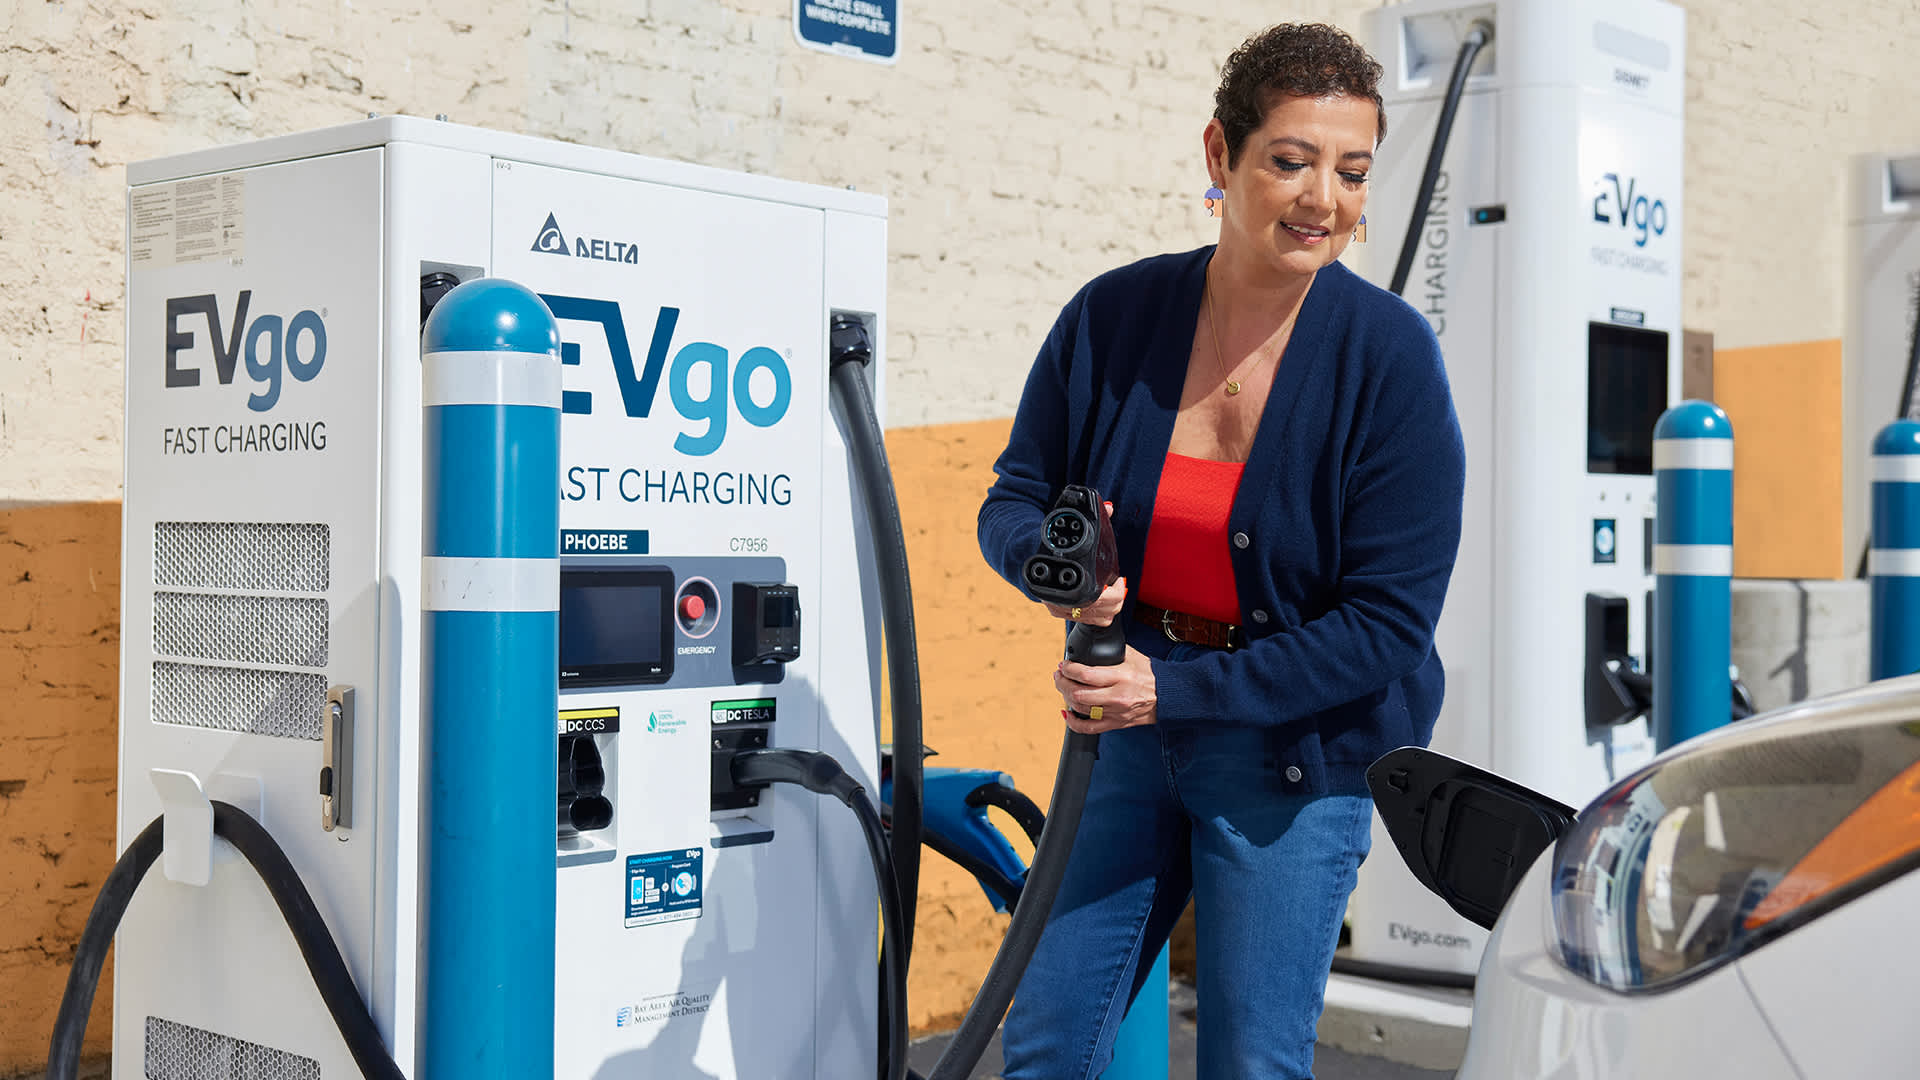 Wallbox Acquires EV Charging Installation Services Company, COIL